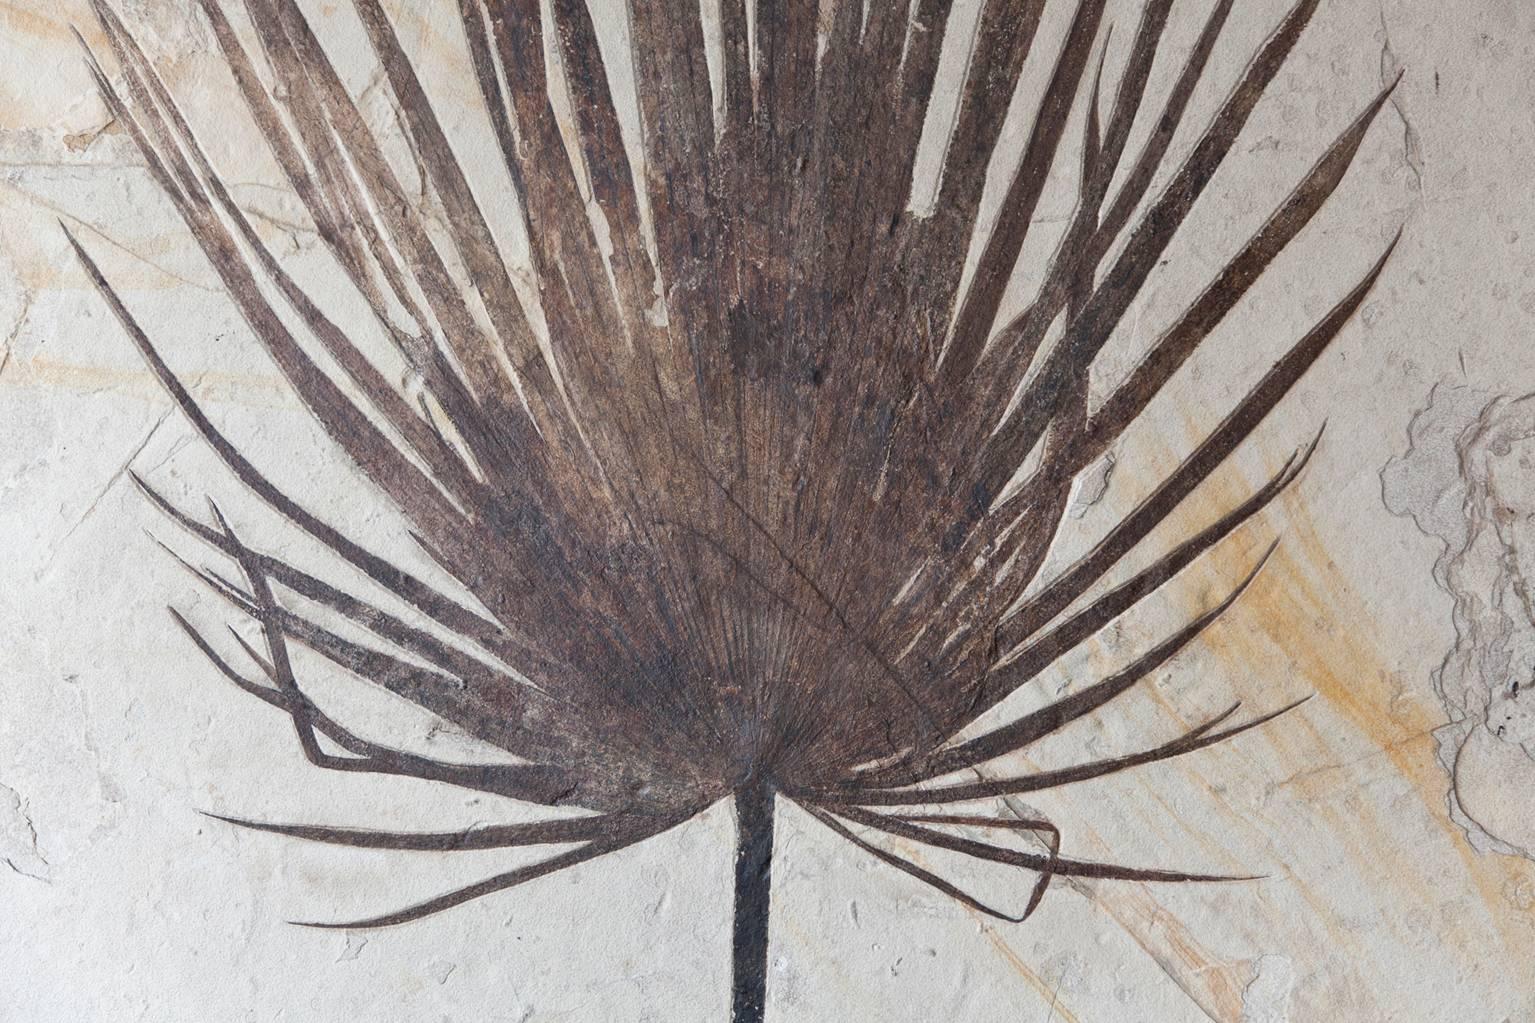 Giant Palm Frond Fossil, United States. Eocene Era.

Not only the age, but the sheer size and level of detail preserved makes this palm frond one of the most impressive in our collection. The palm frond was alive around 55 million years ago, in the